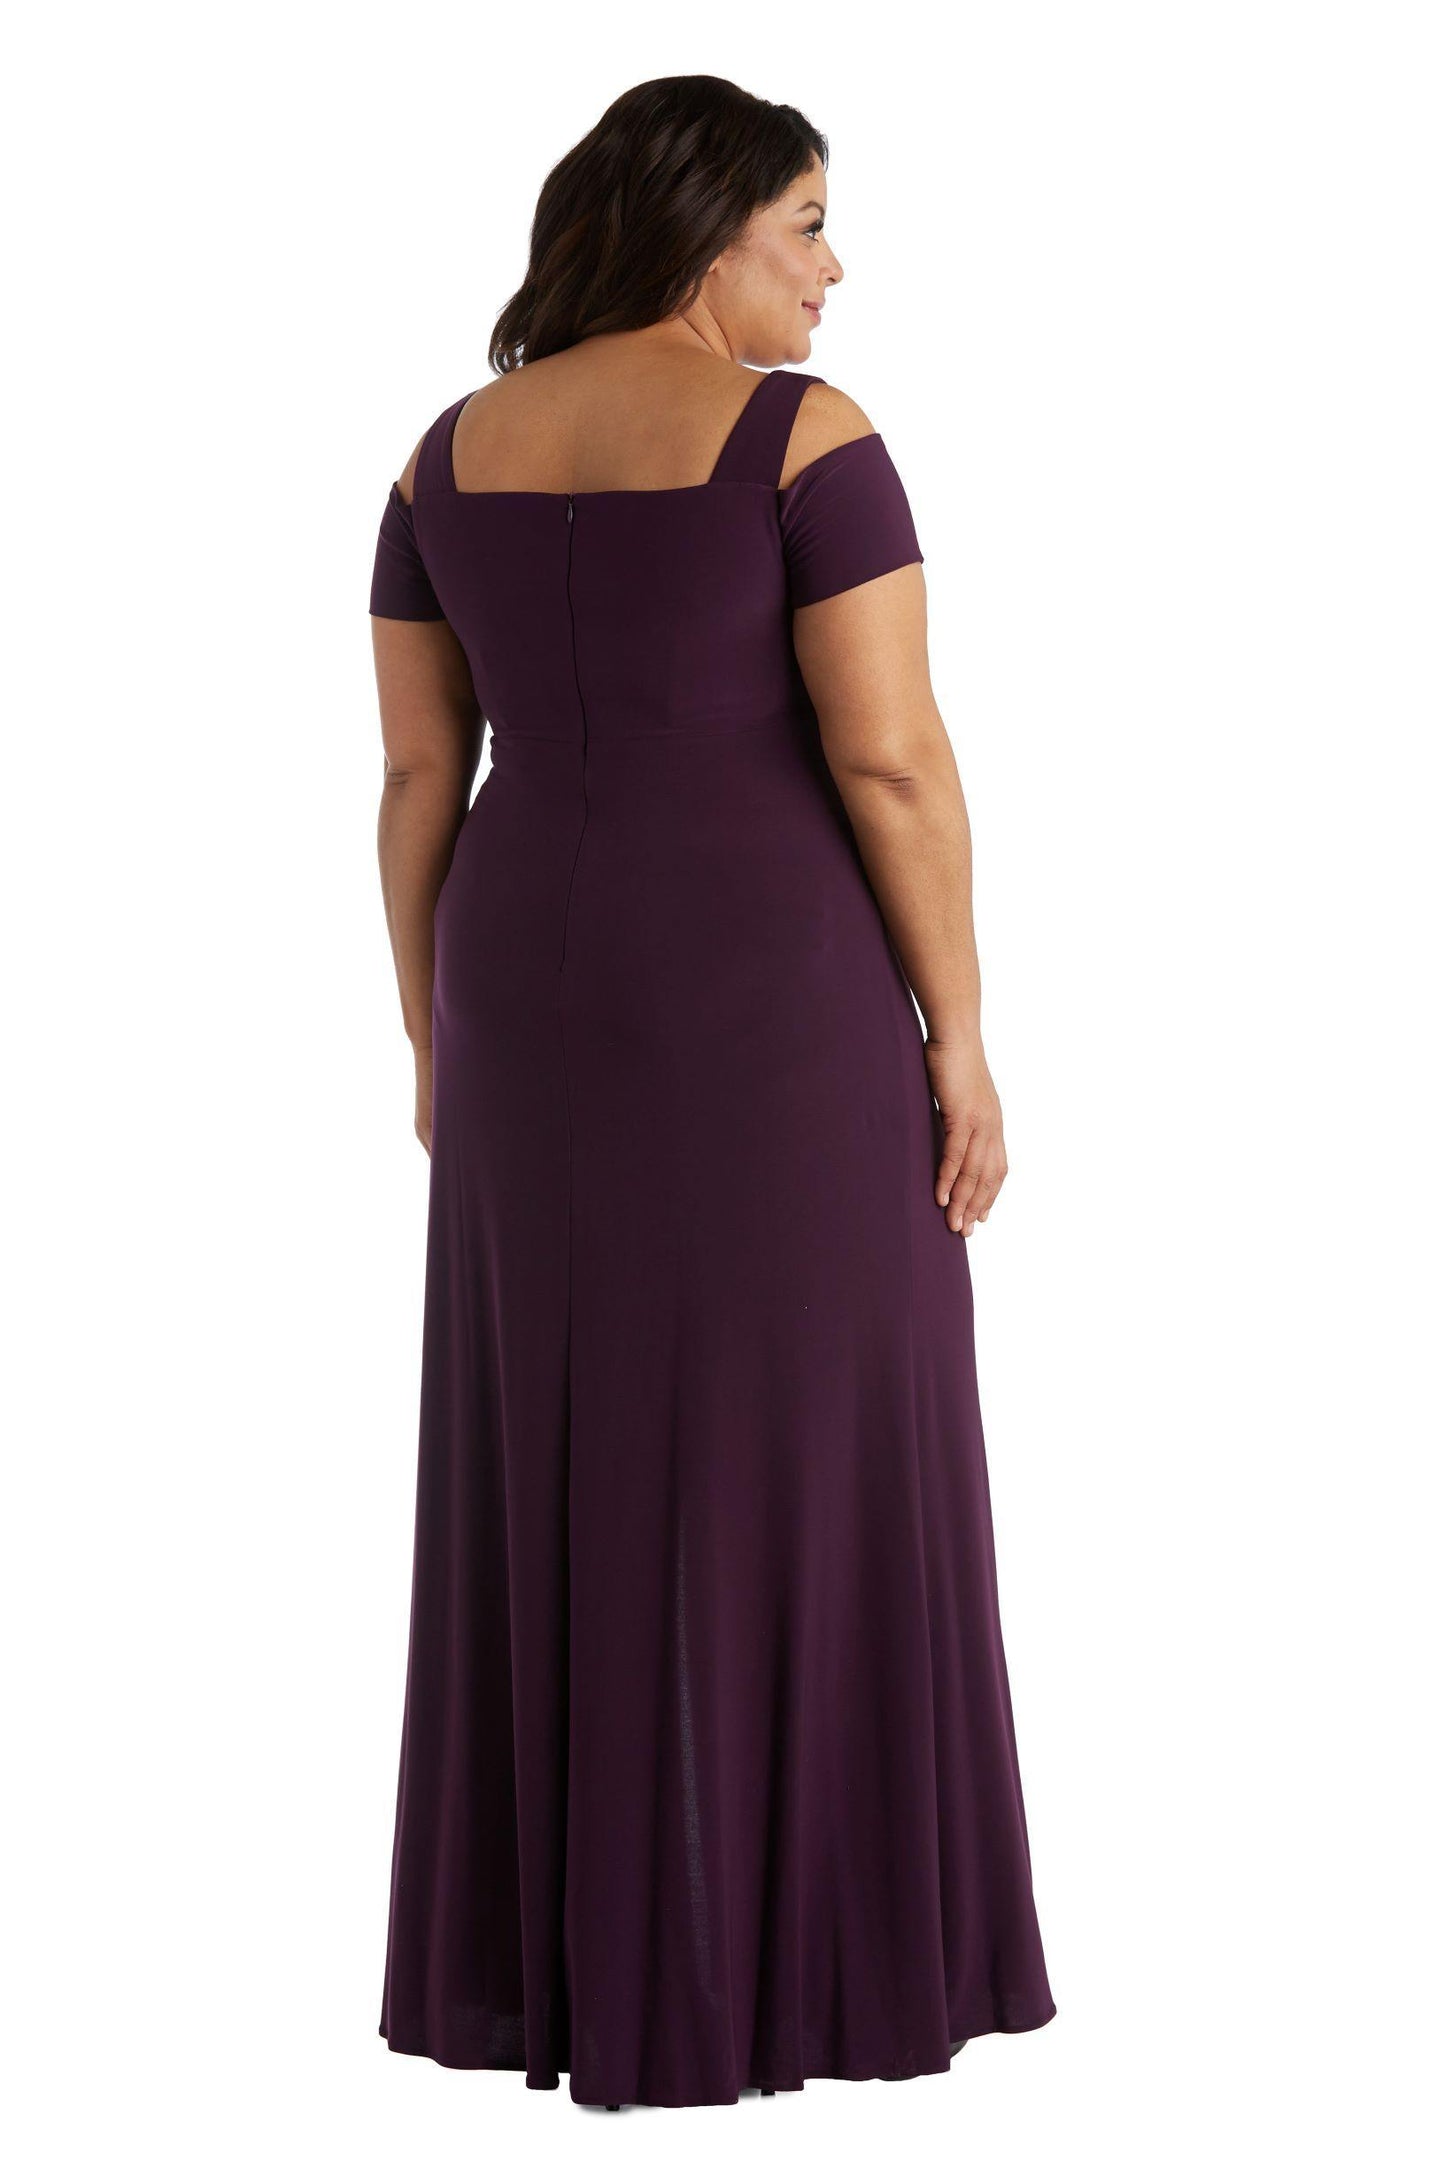 Nightway Plus Size Long Formal Dress Sale - The Dress Outlet